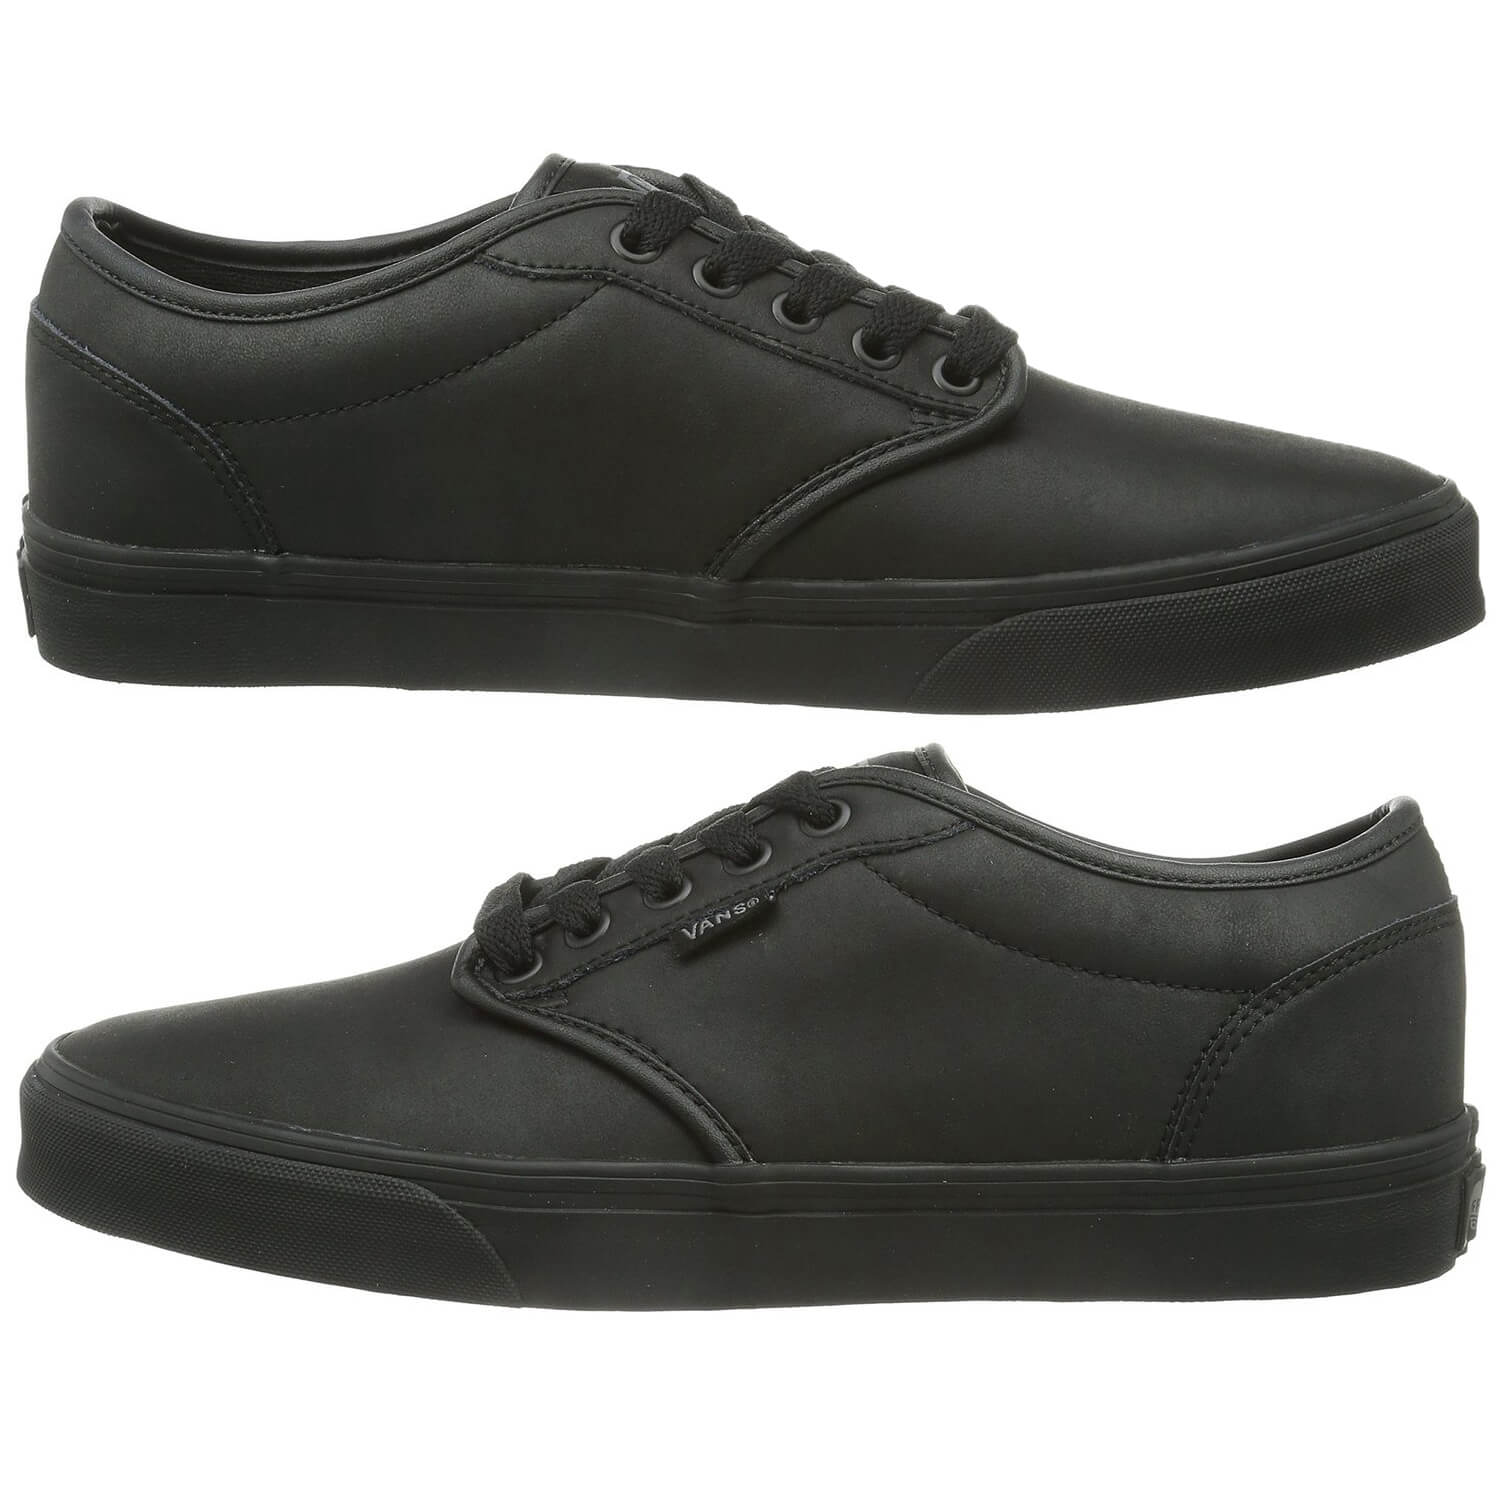 VANS Mens Atwood Leather Black School Shoes New Fashion Casual Skater ...